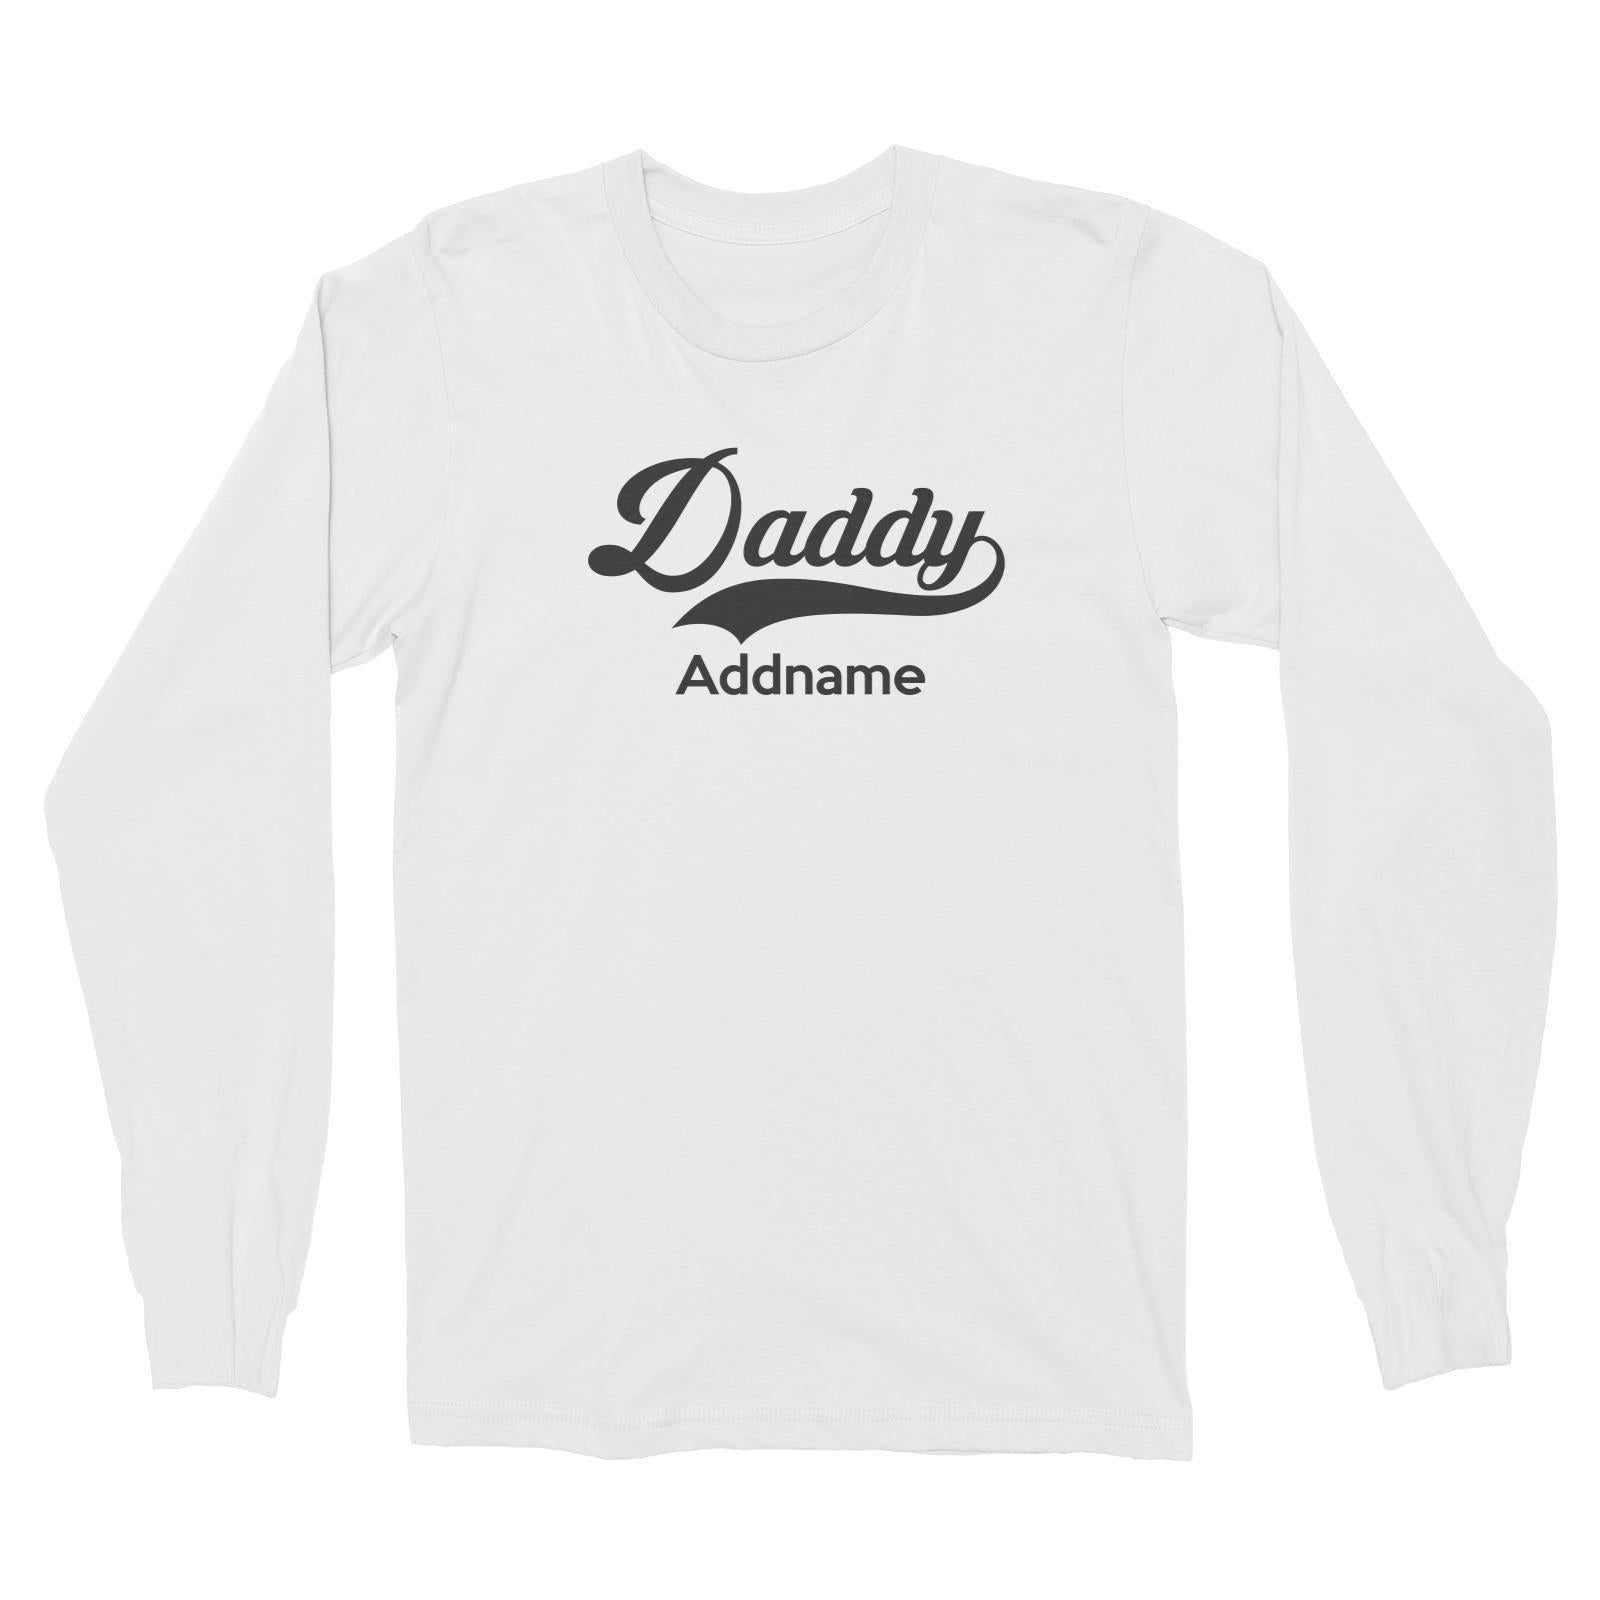 Retro Daddy Addname Long Sleeve Unisex T-Shirt  Matching Family Personalizable Designs